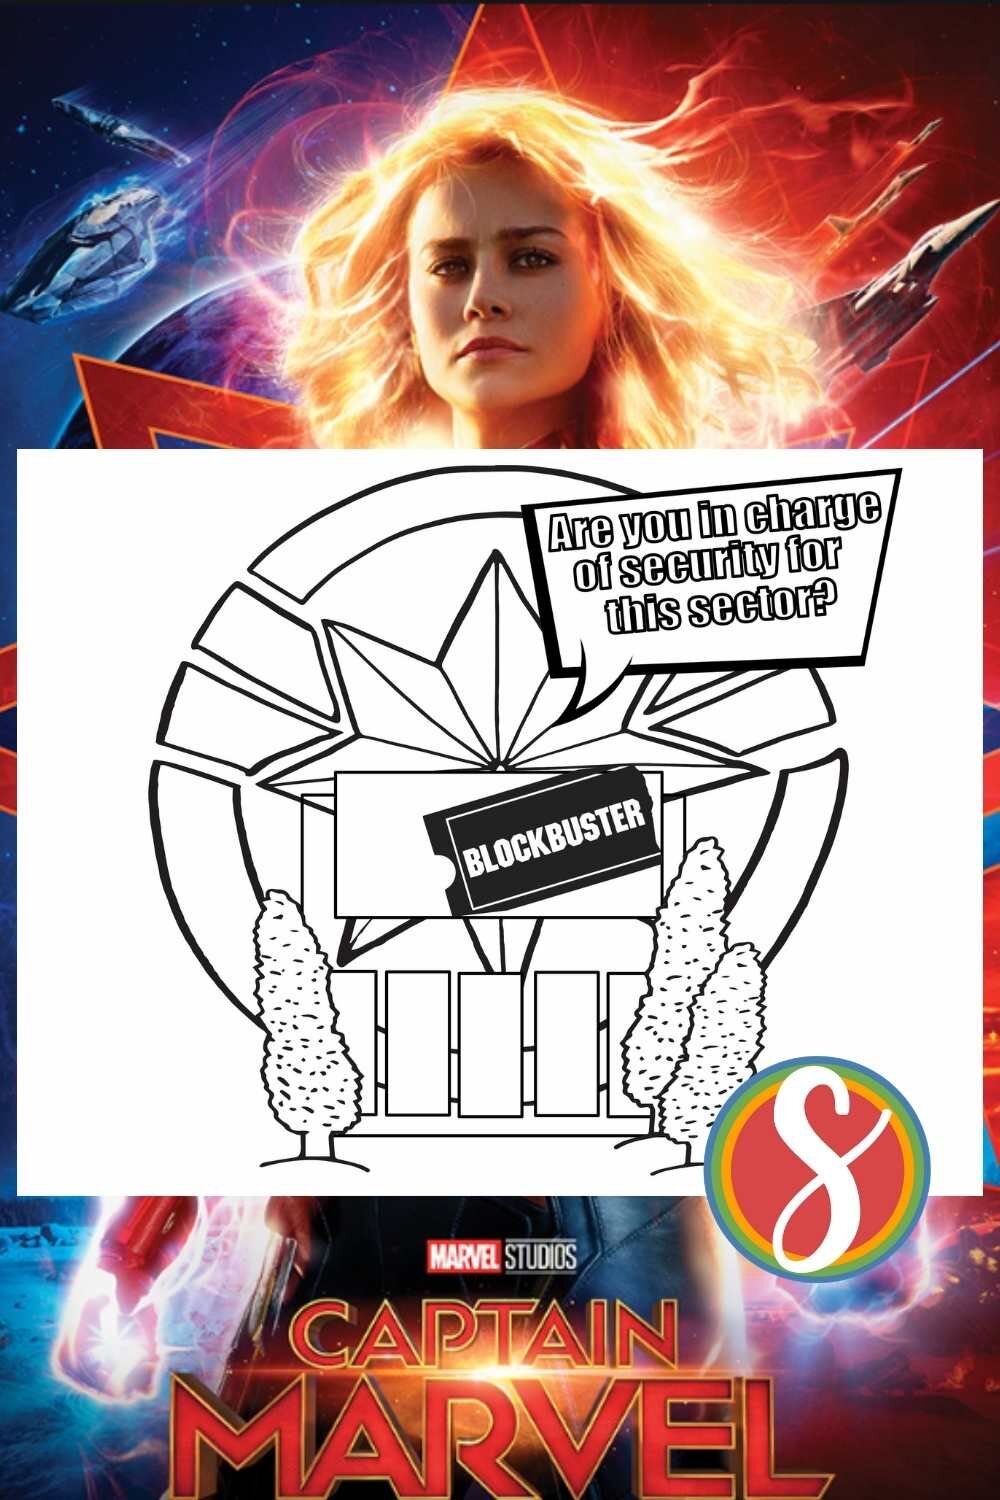 Captain Marvel Blockbuster quote coloring page - 7 free Captain Marvel sheets to print and color from Stevie Doodles